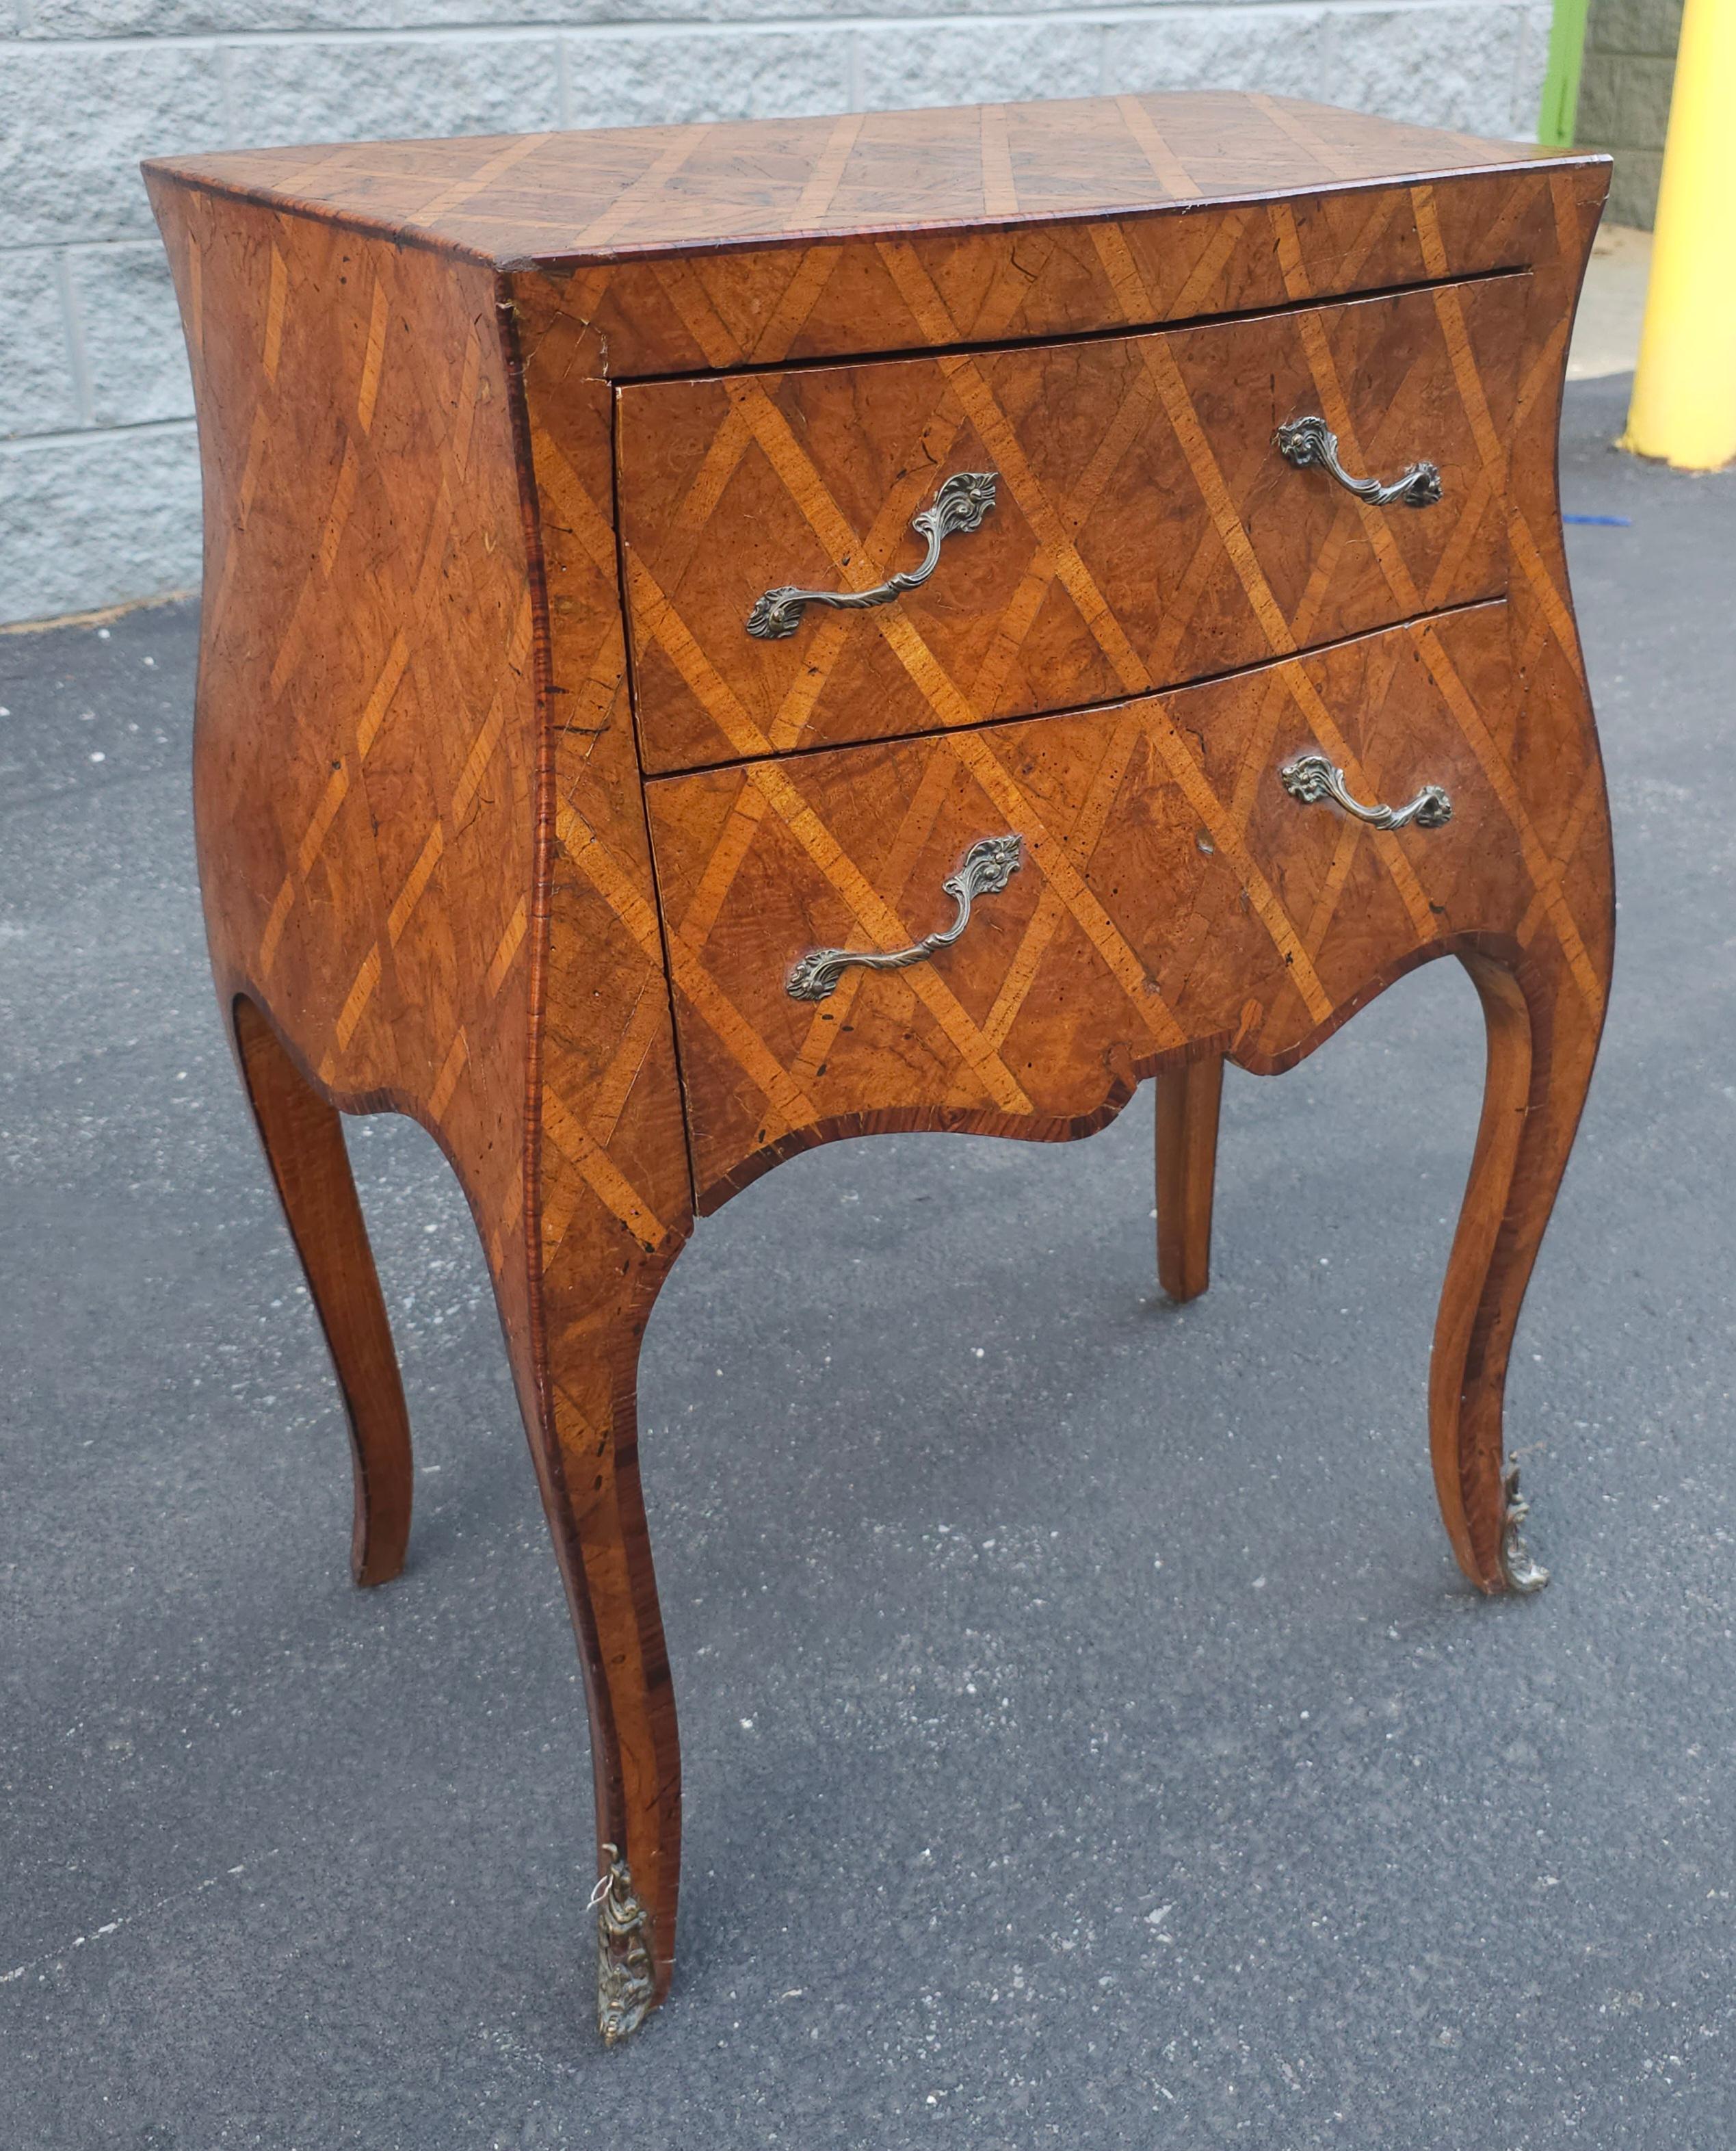 20th C. Italian Parquetry and Marquetry Petite Bombay Chest Commode Side Table In Good Condition For Sale In Germantown, MD